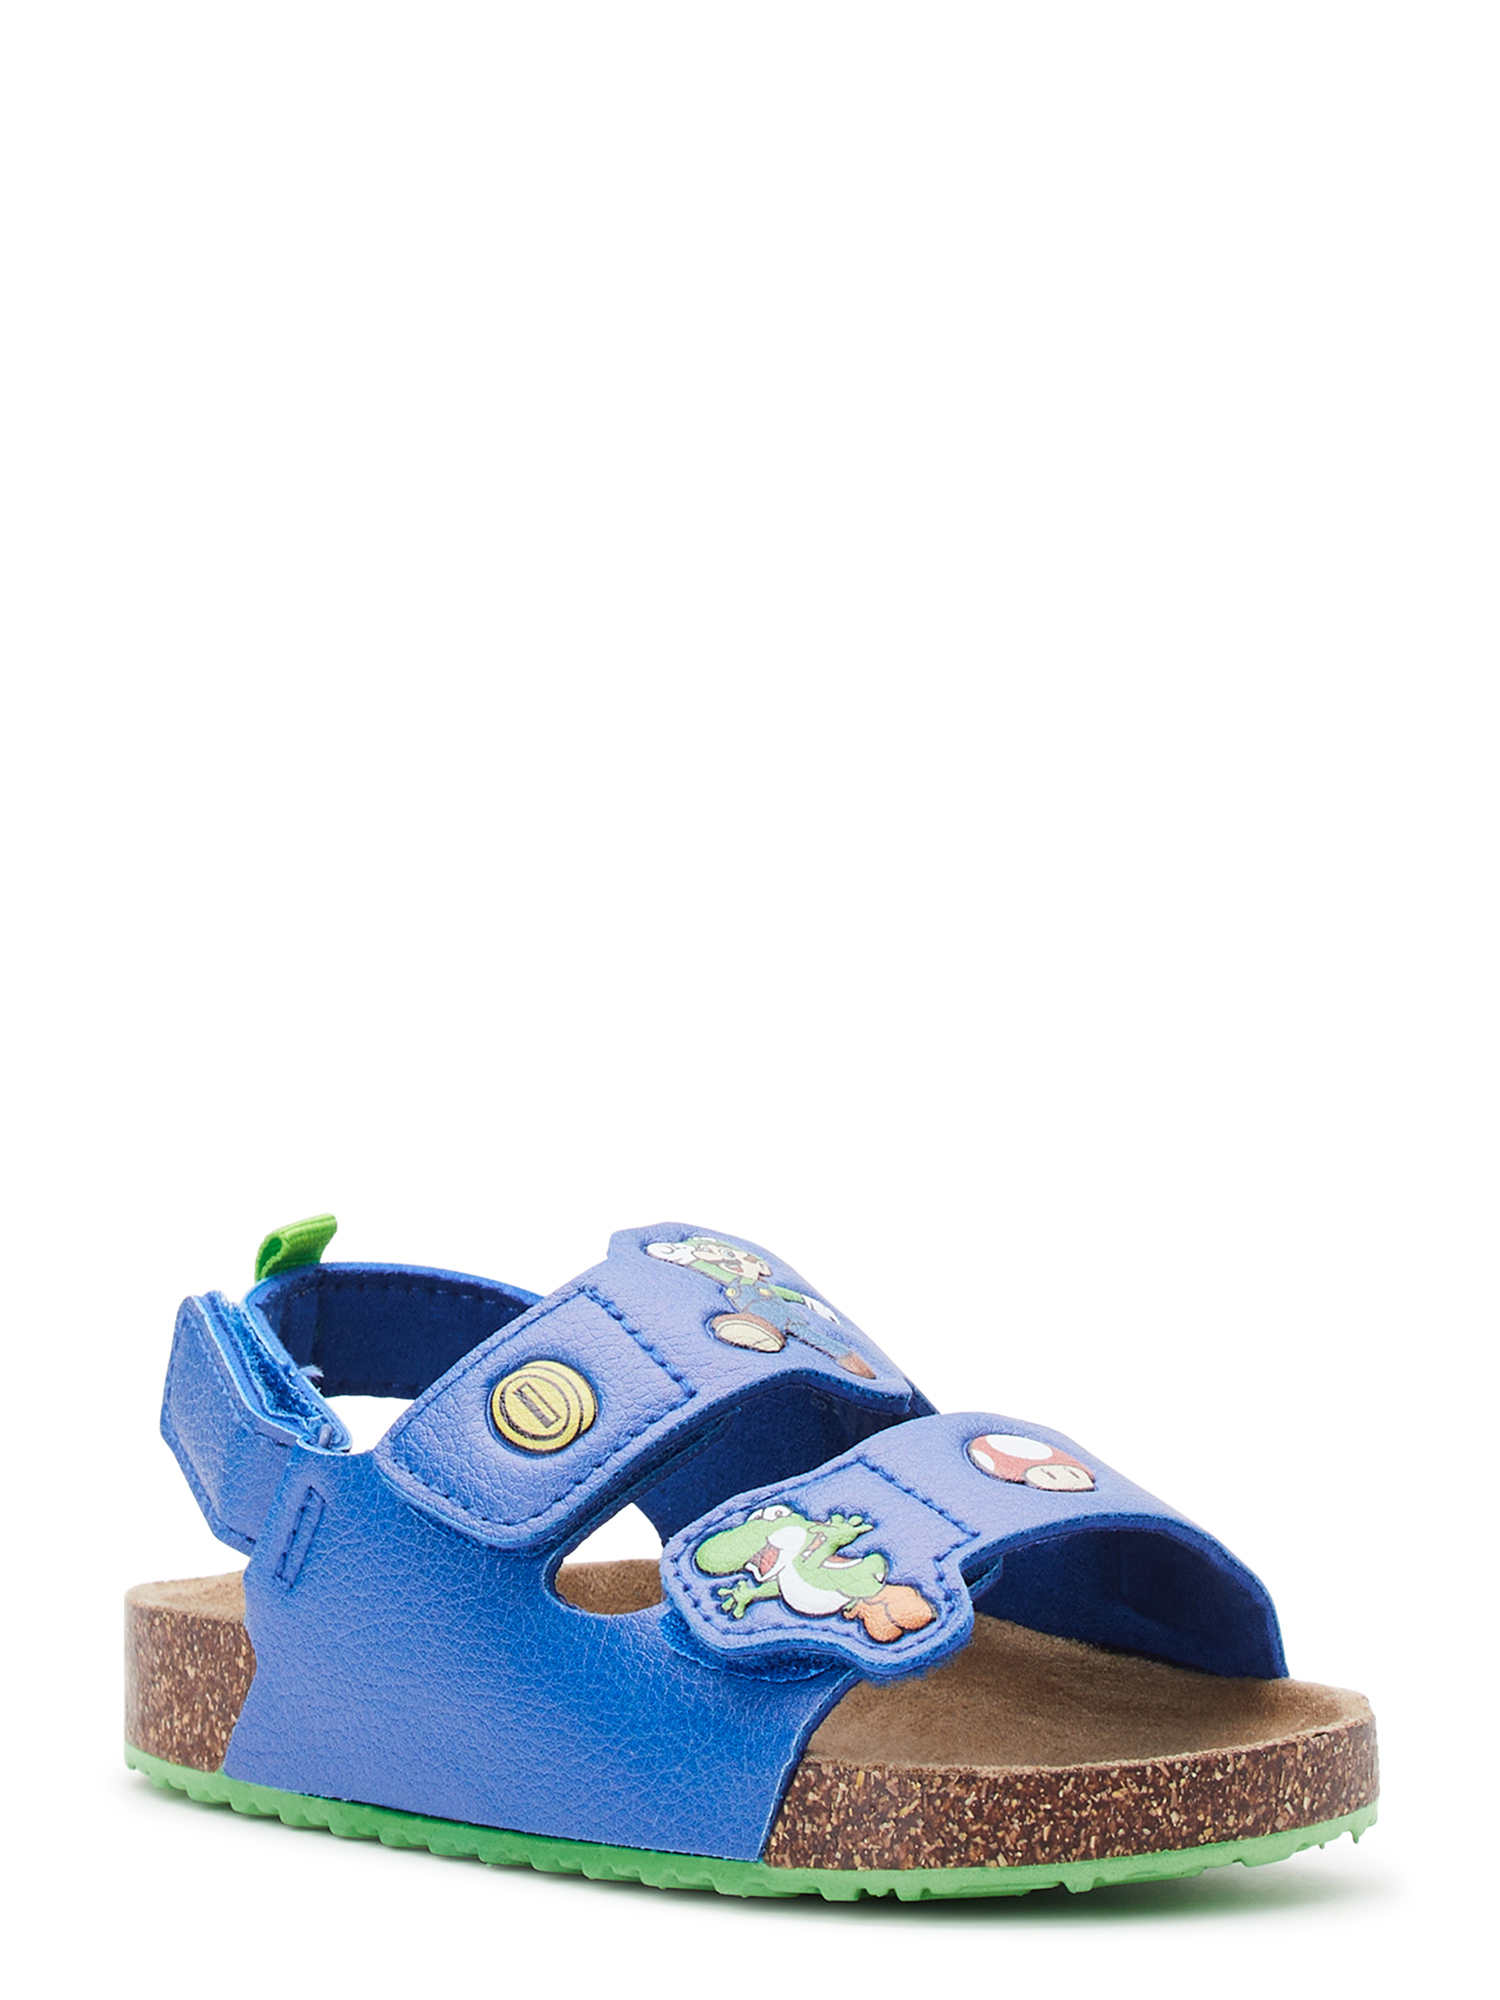 Super Mario Toddler Boys Footbed Sandals, Sizes 7-12